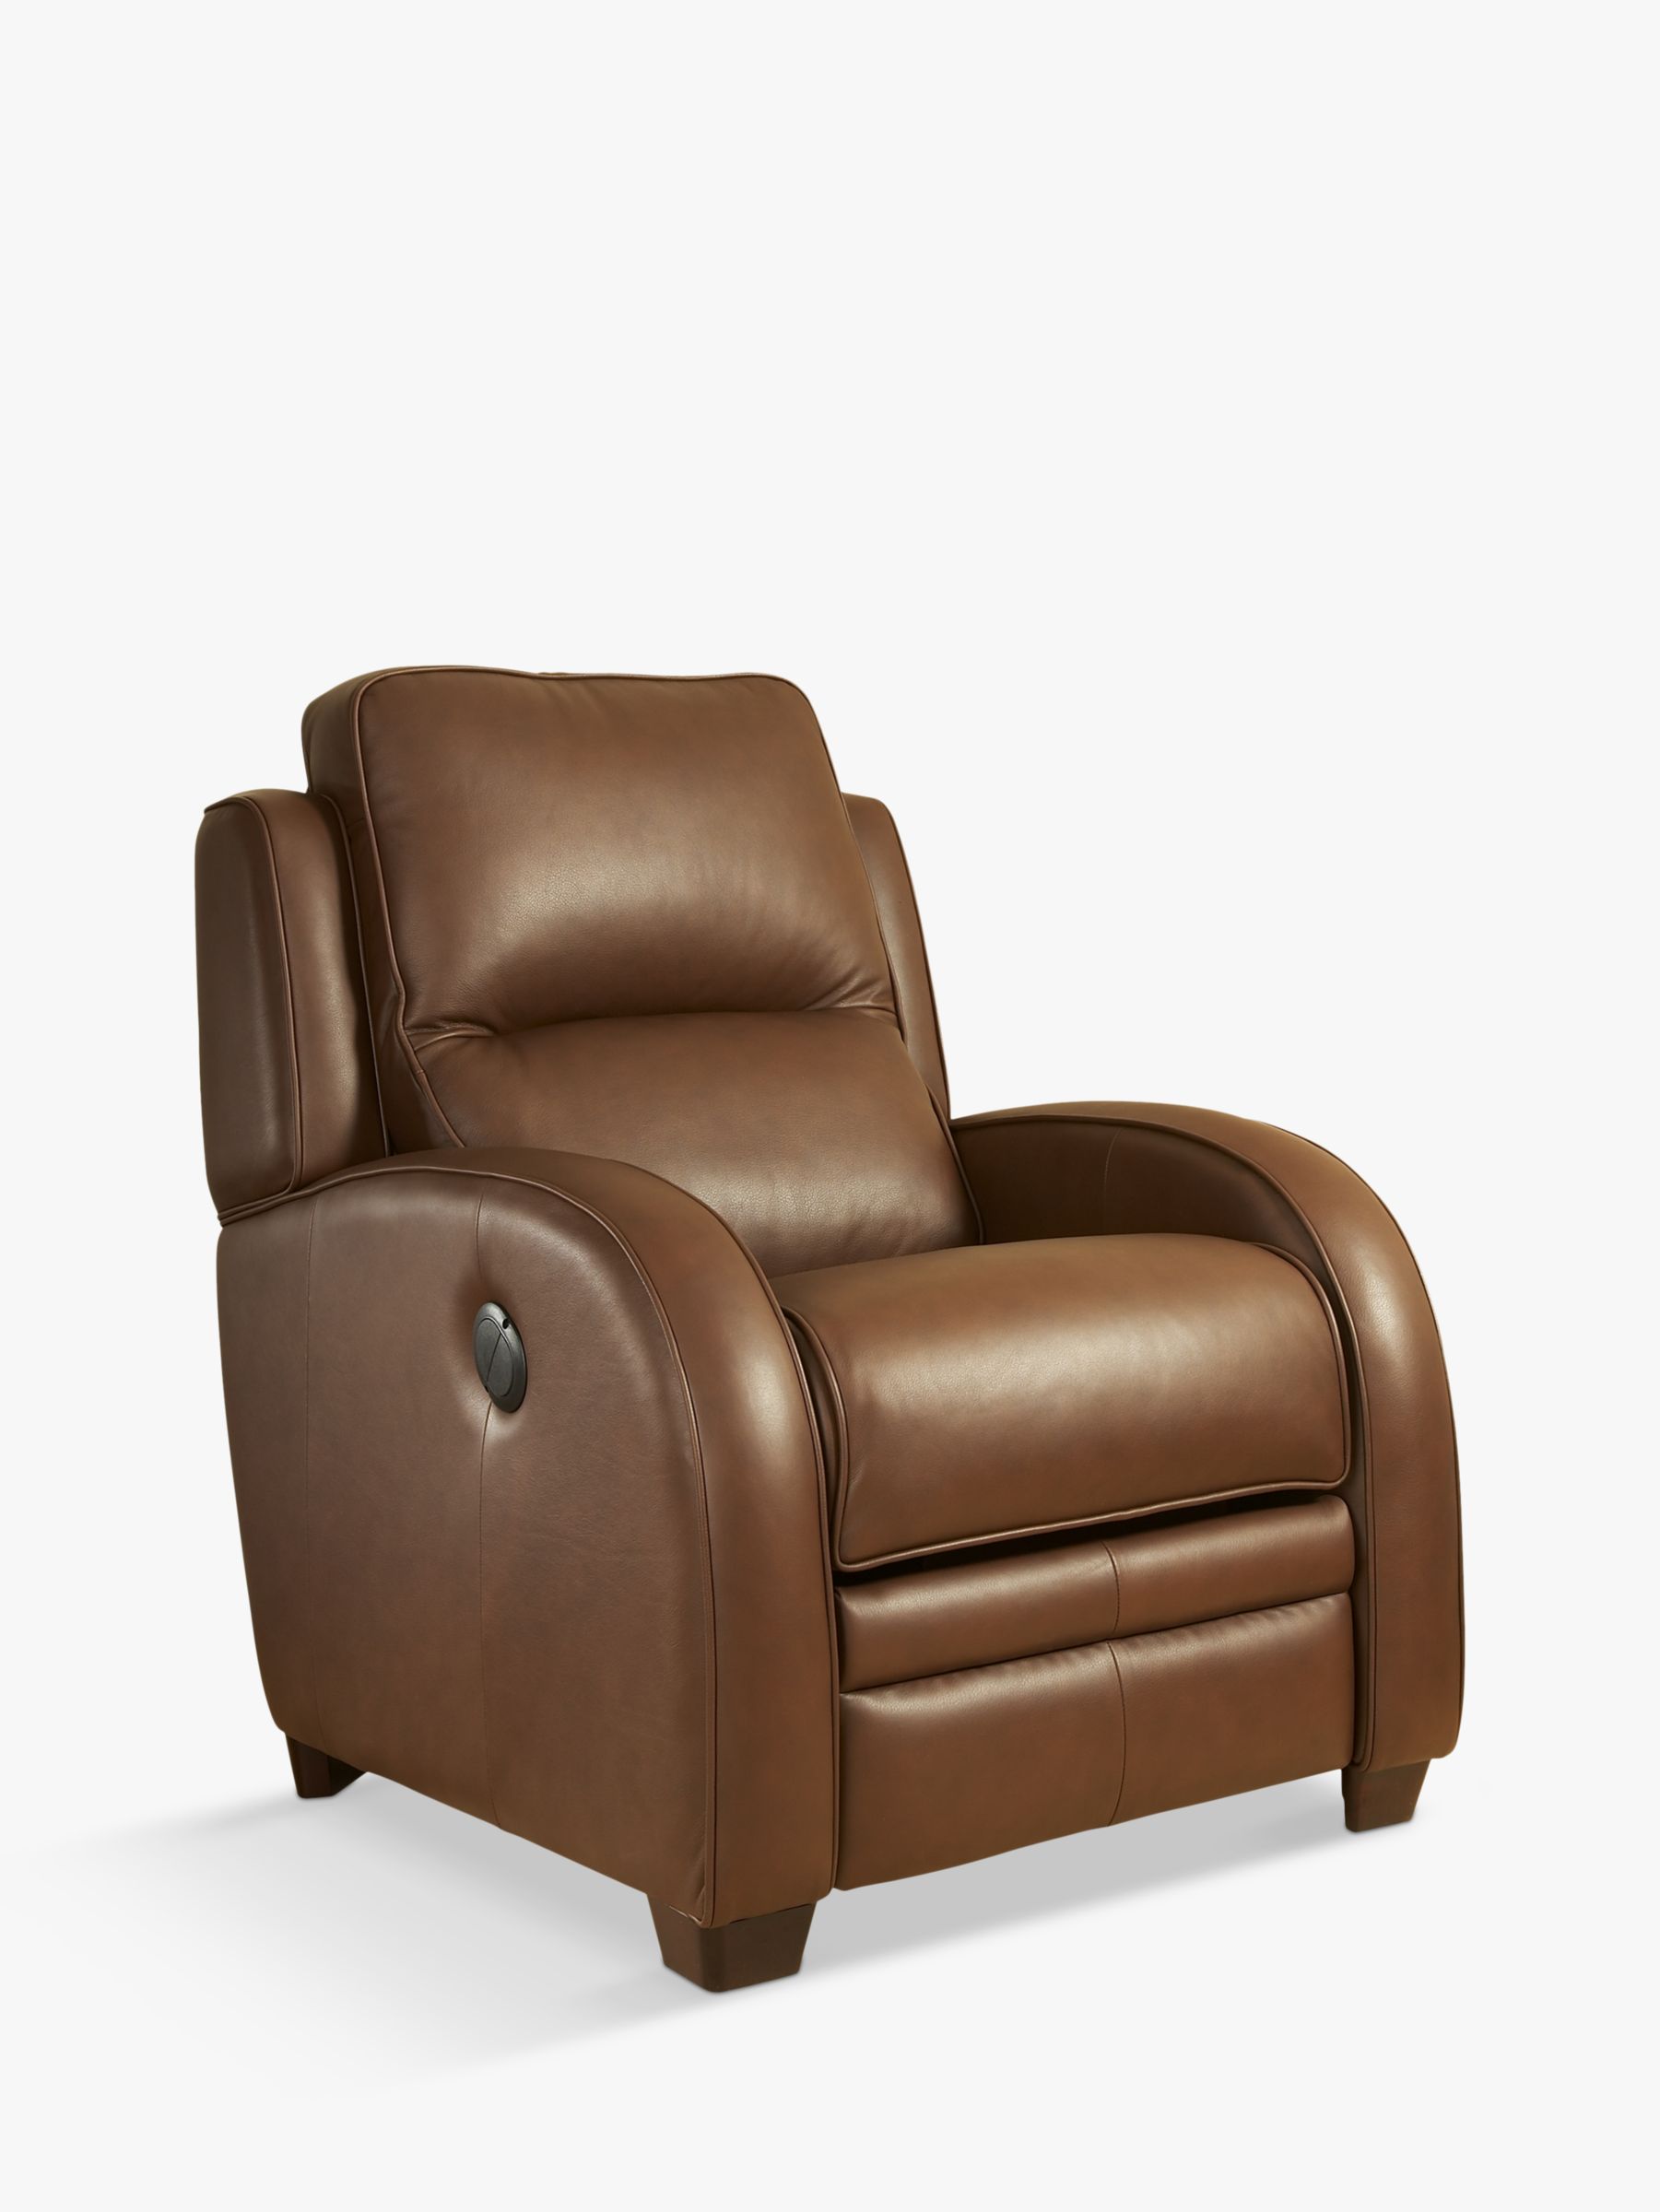 Power Recliner Leather Armchair, Leather Chairs Recliner